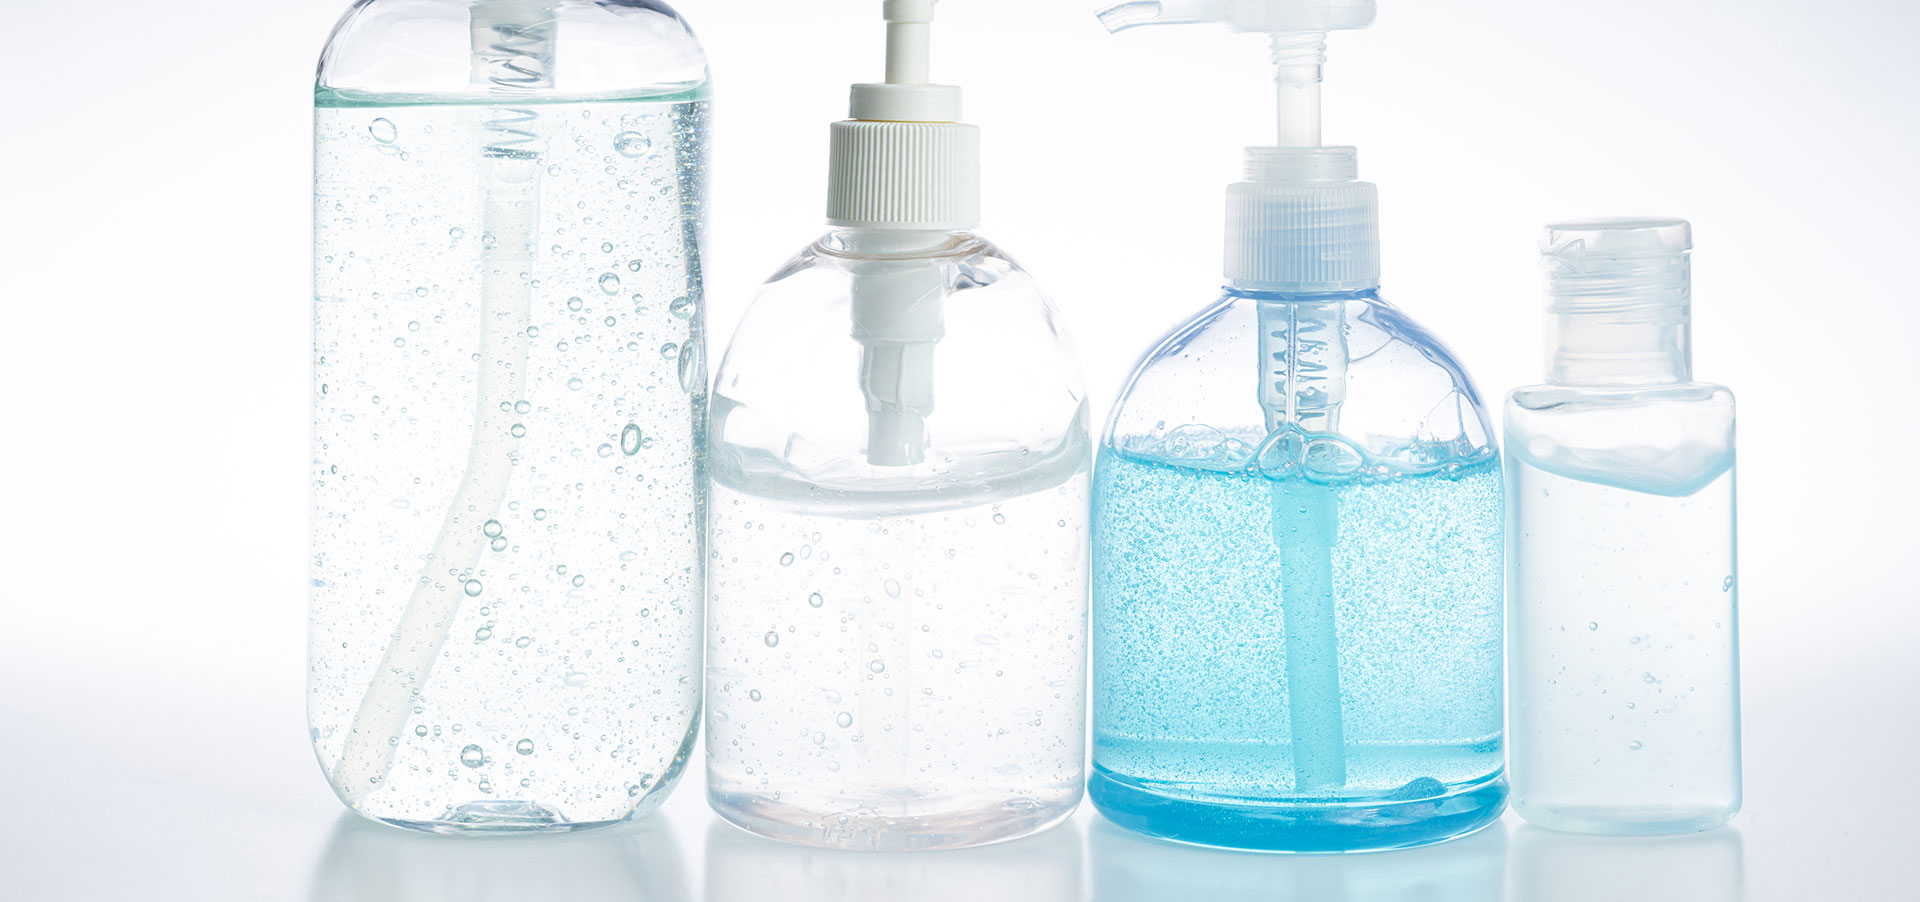 Four bottles of hand sanitizer in different sizes, the largest three with pump dispensers, the travel sized bottle has a flip top dispenser